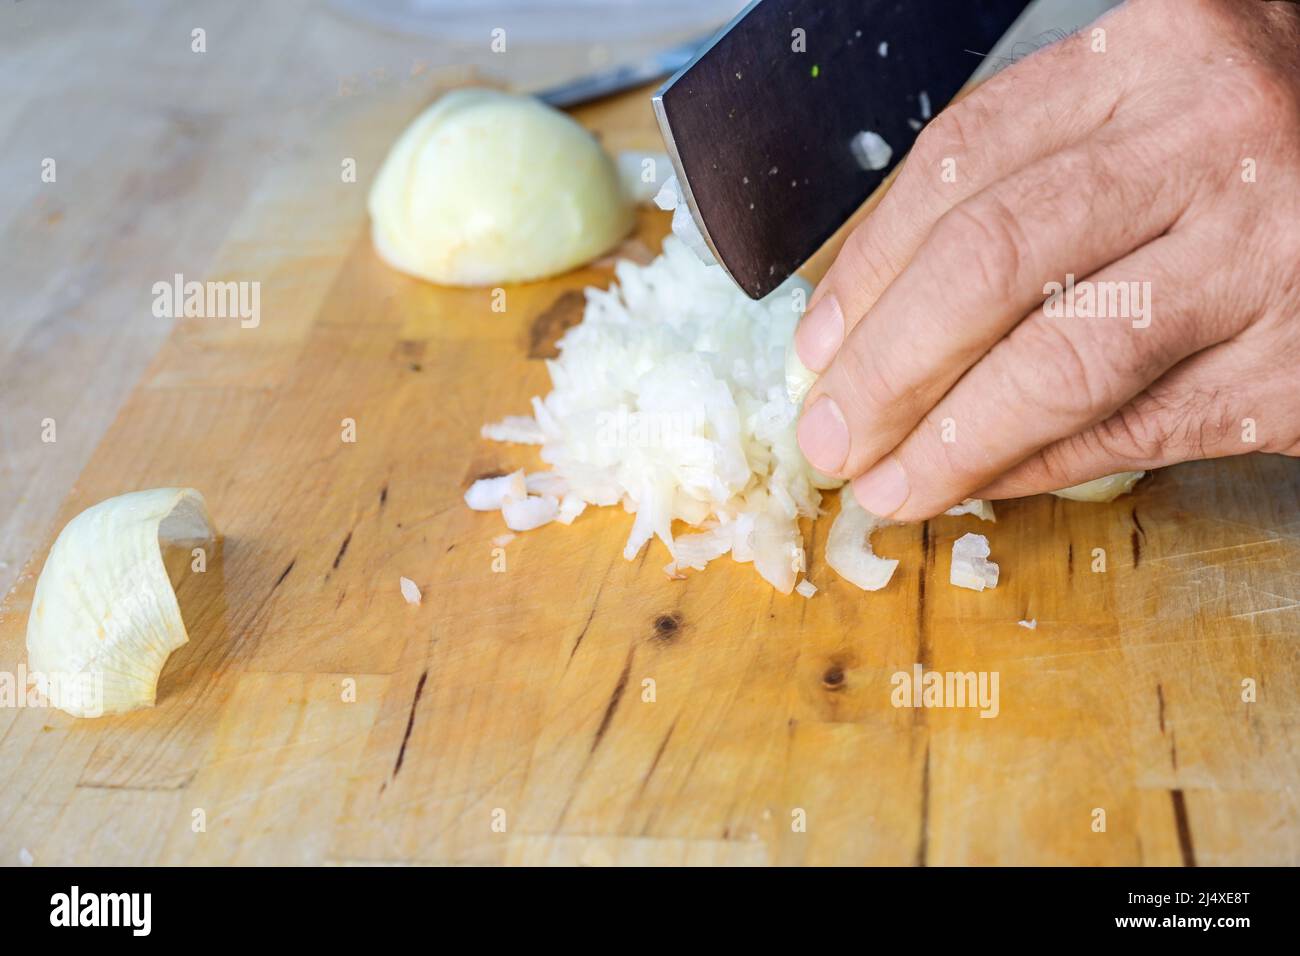 Hand of a man cutting onions into small cubes with a kitchen knife on a wooden cutting board, copy space, selected focus, narrow depth of field Stock Photo